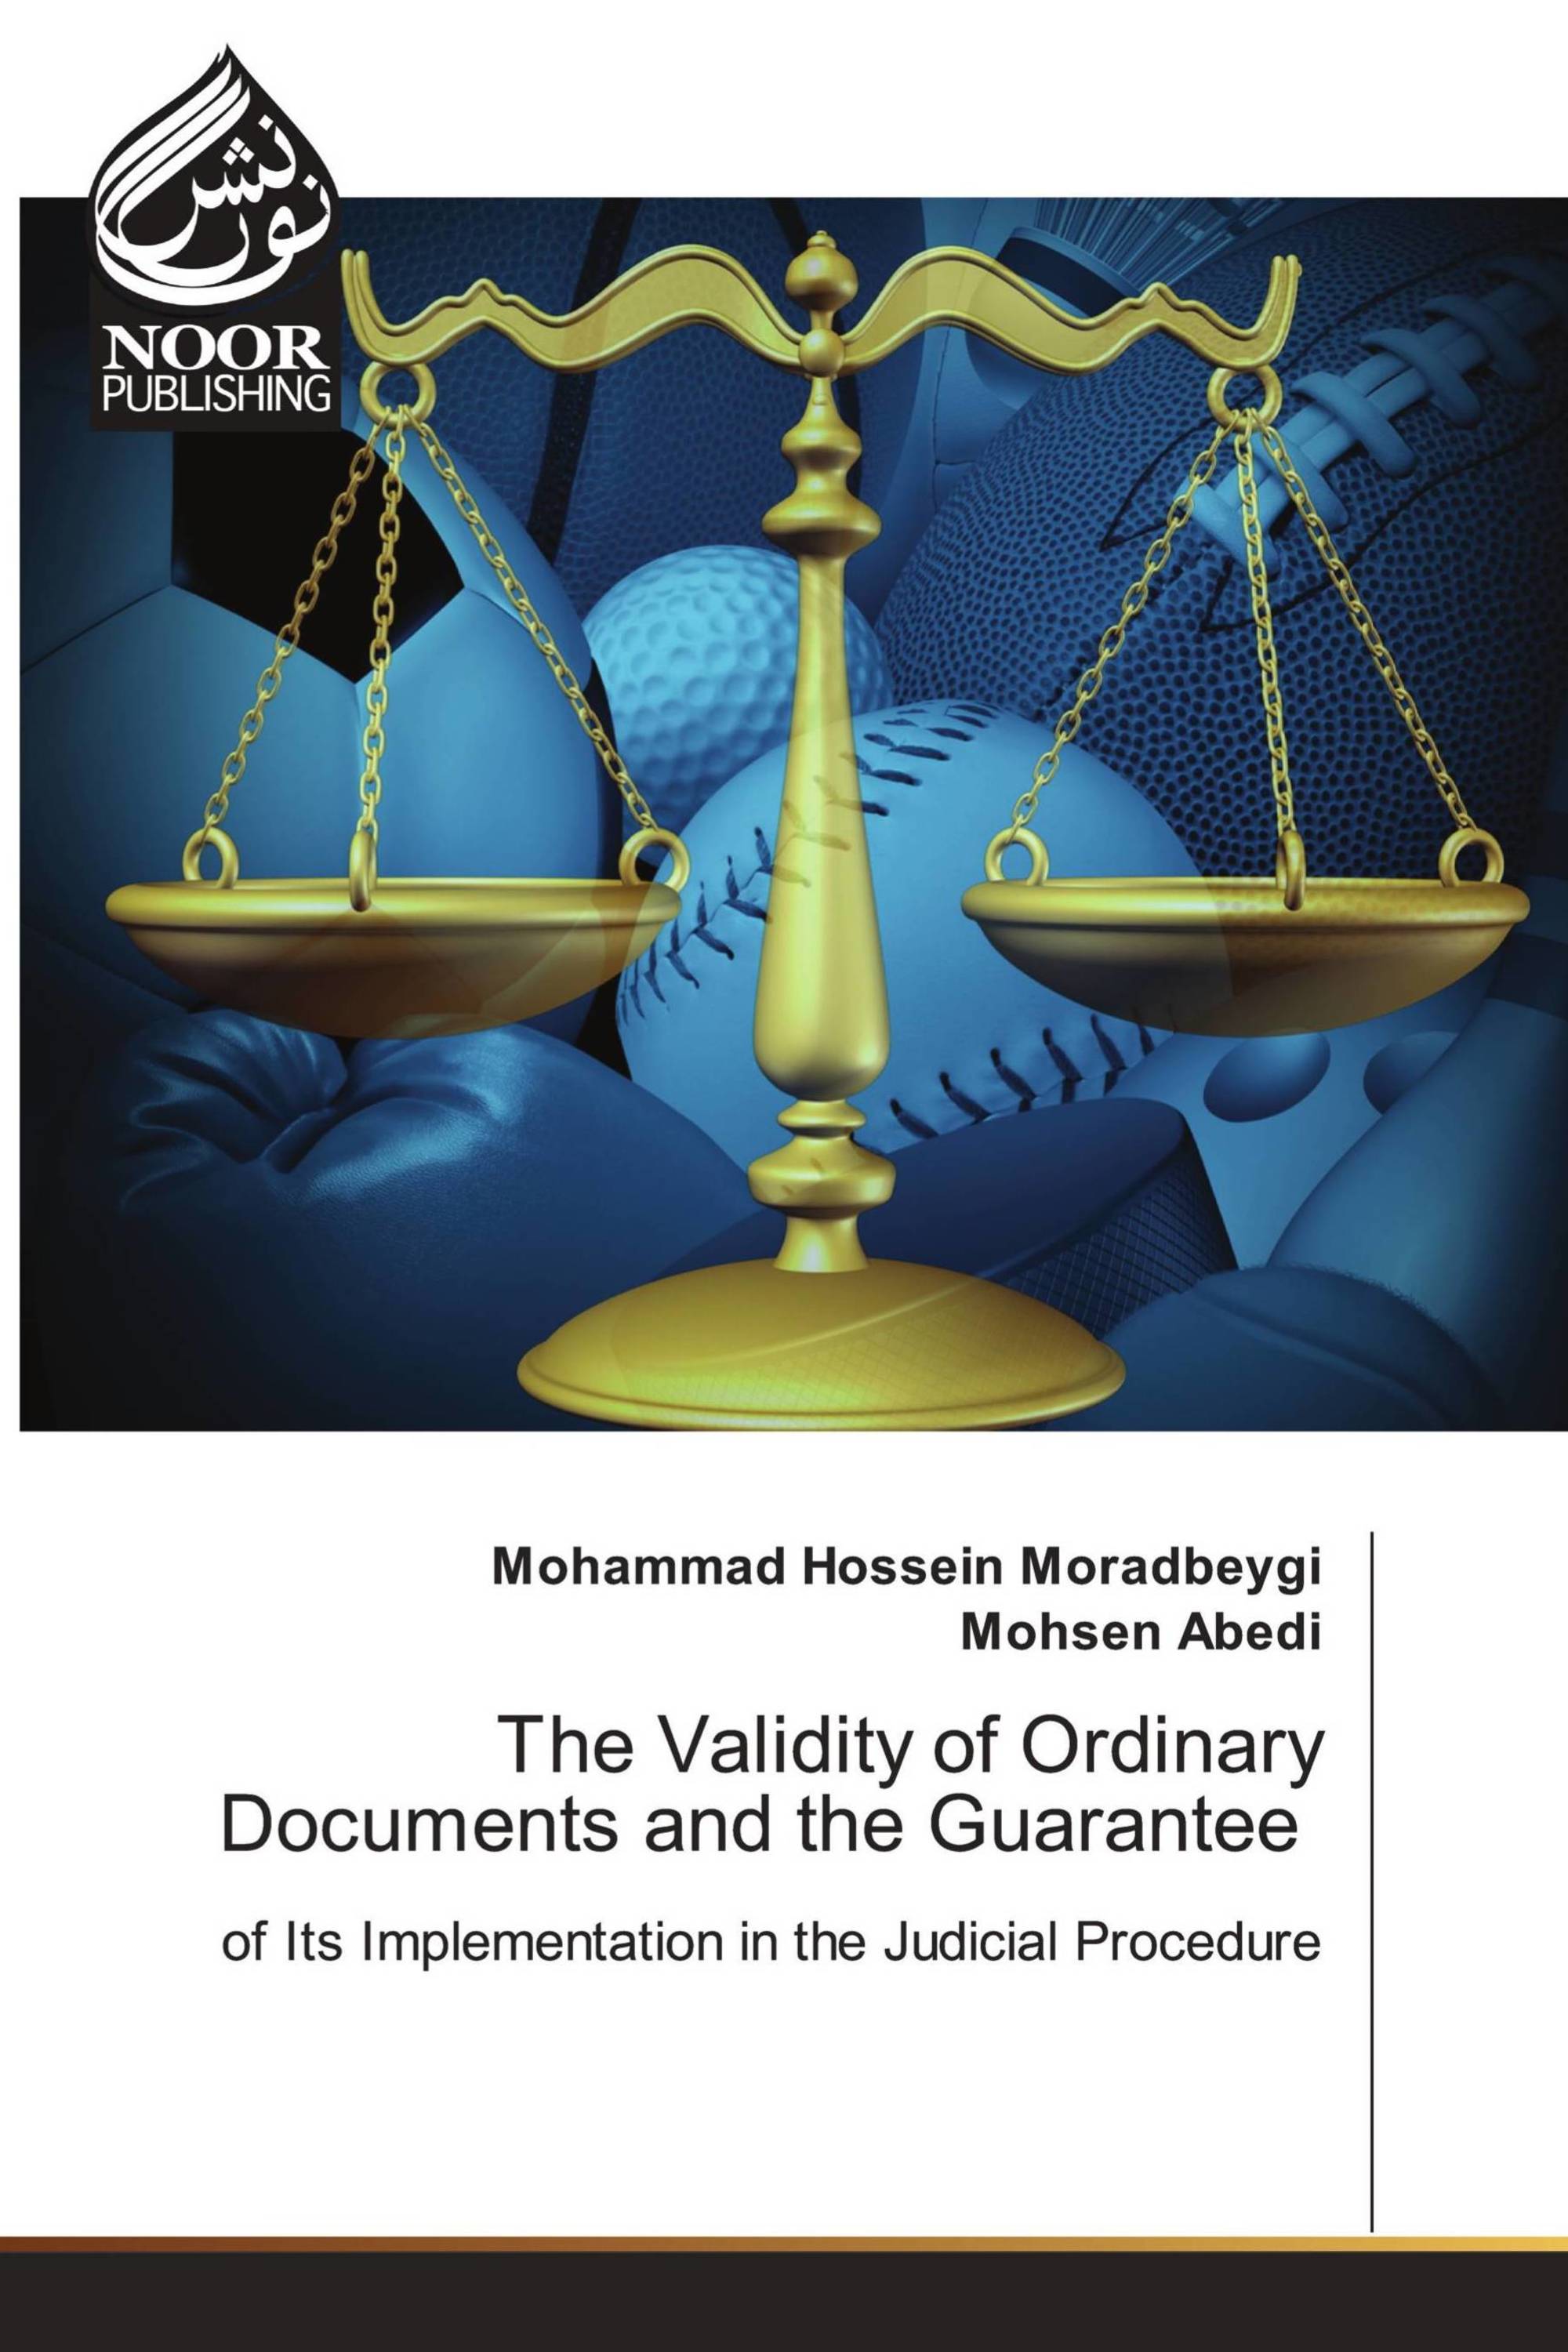 The Validity of Ordinary Documents and the Guarantee